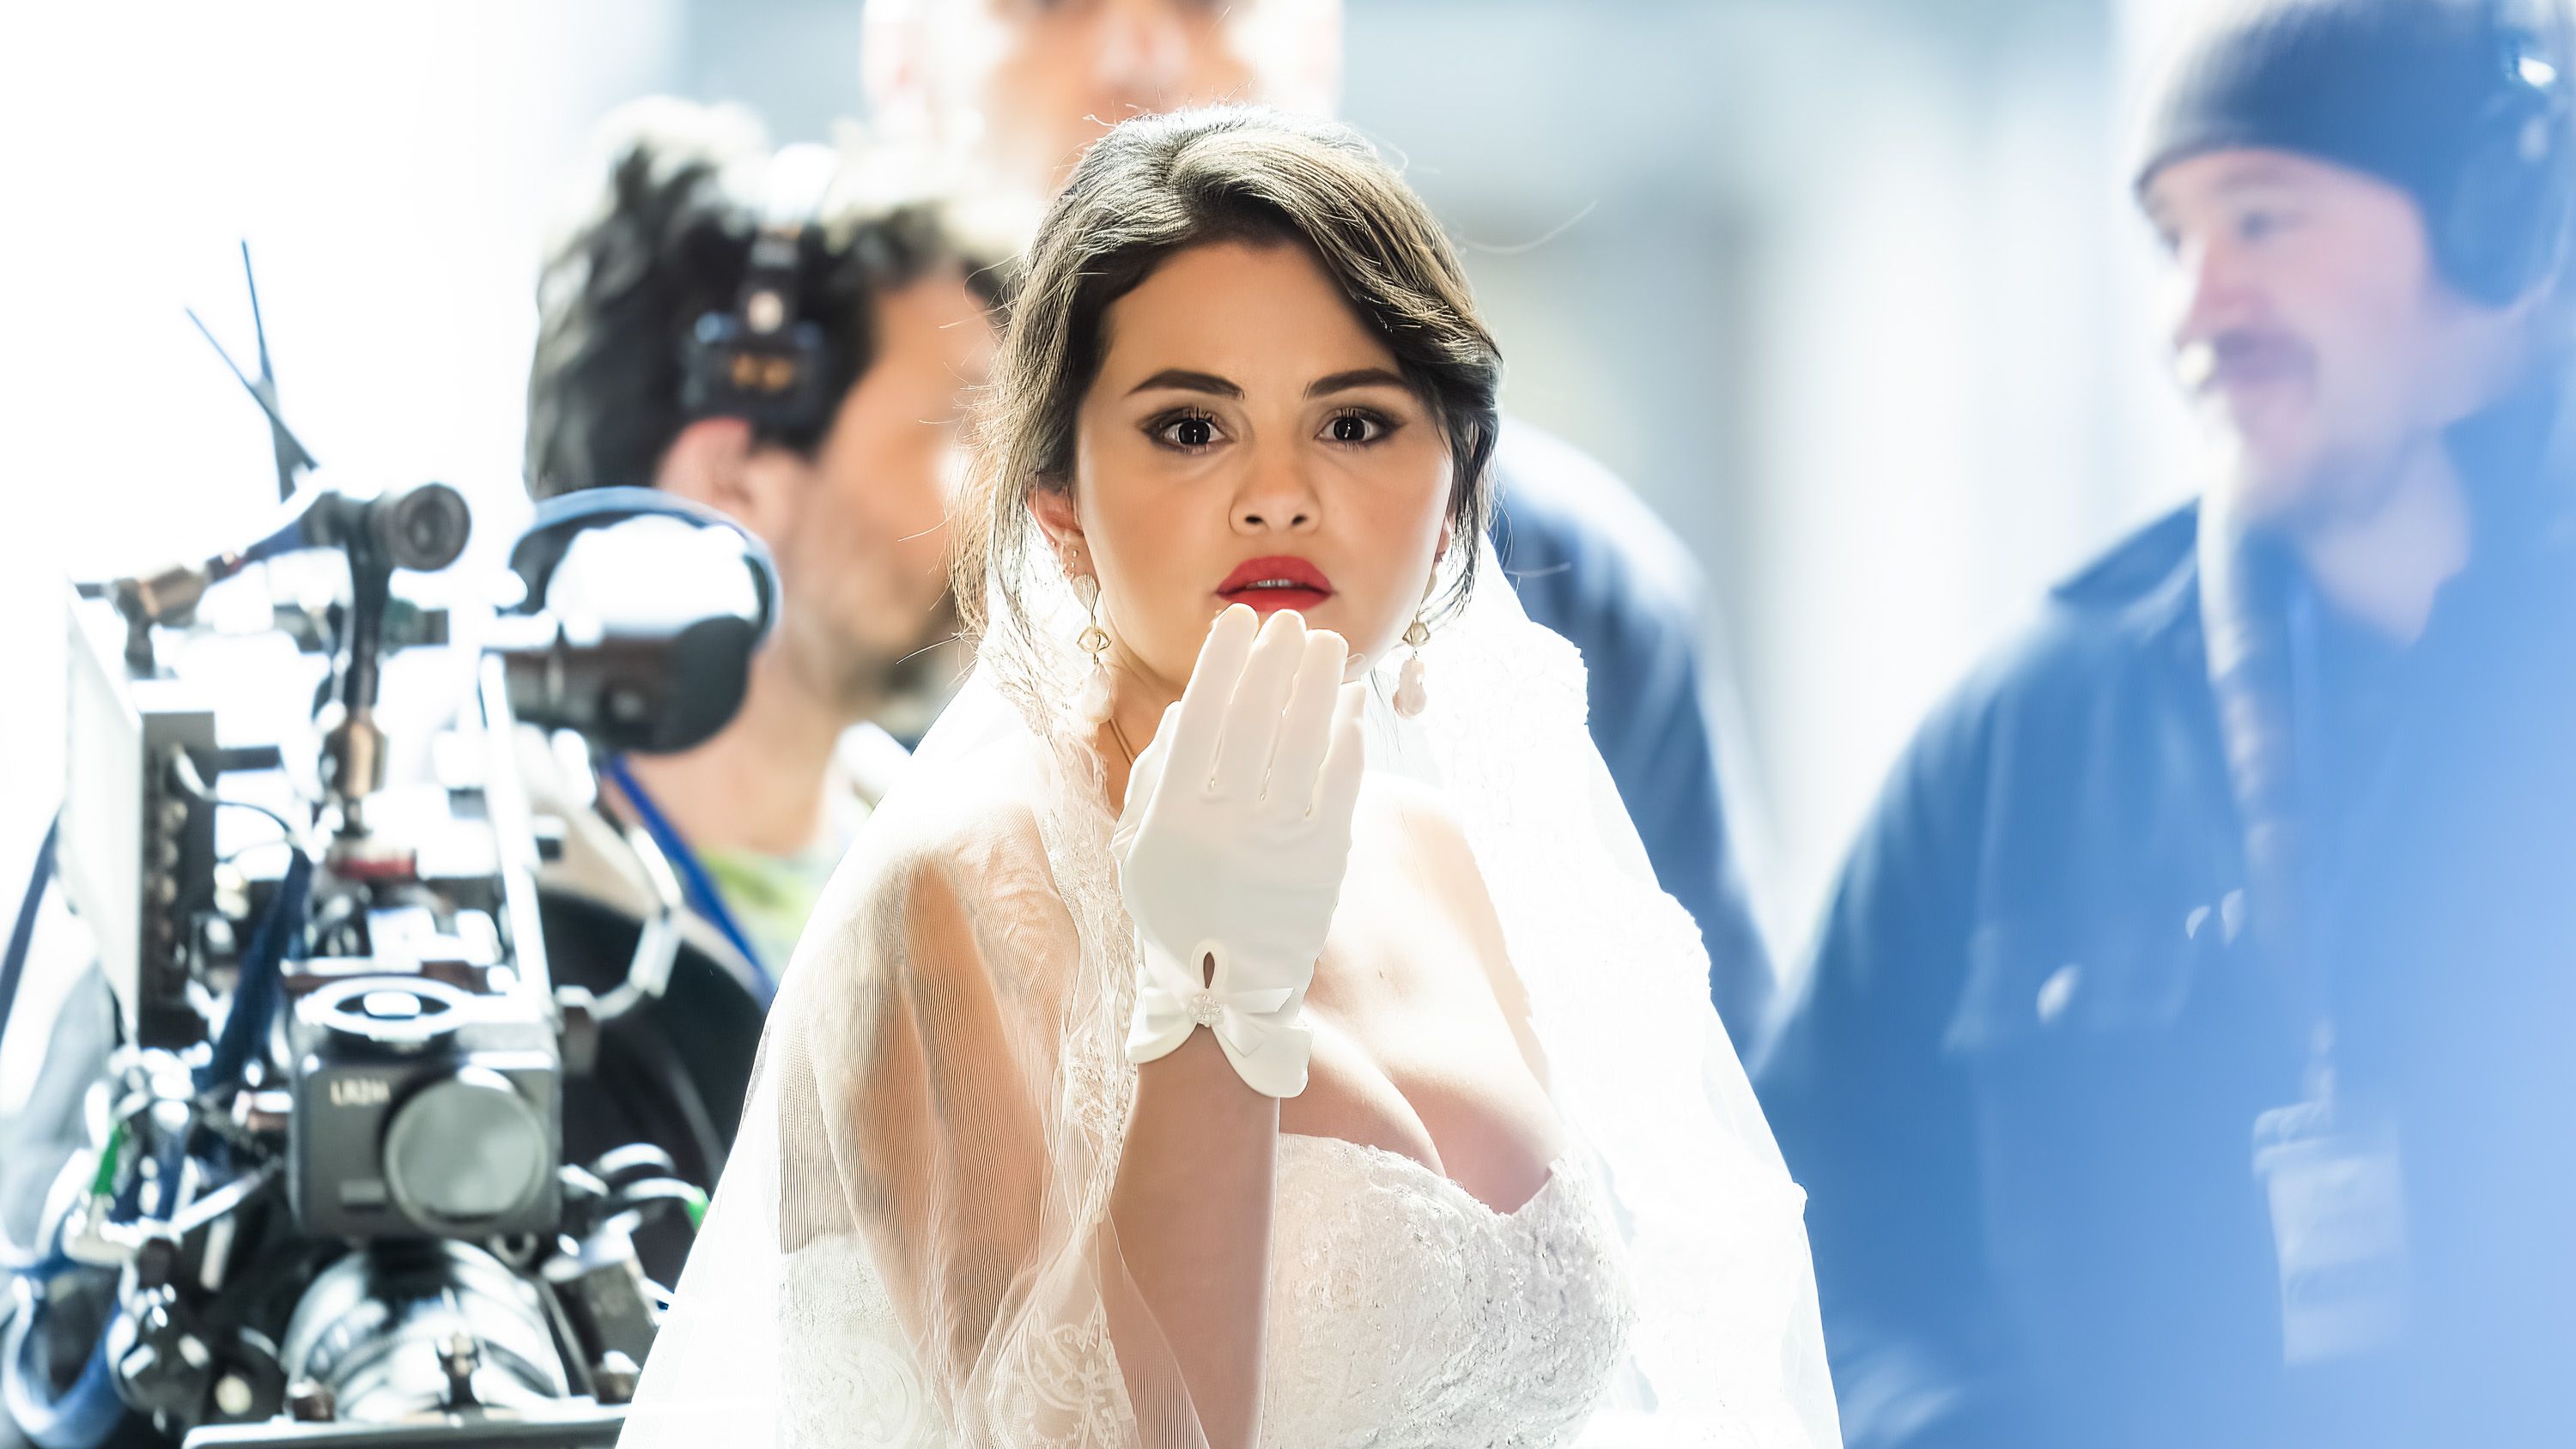 A Fake Photo of Selena Gomez at the 2023 Met Gala Went Viral on Twitter